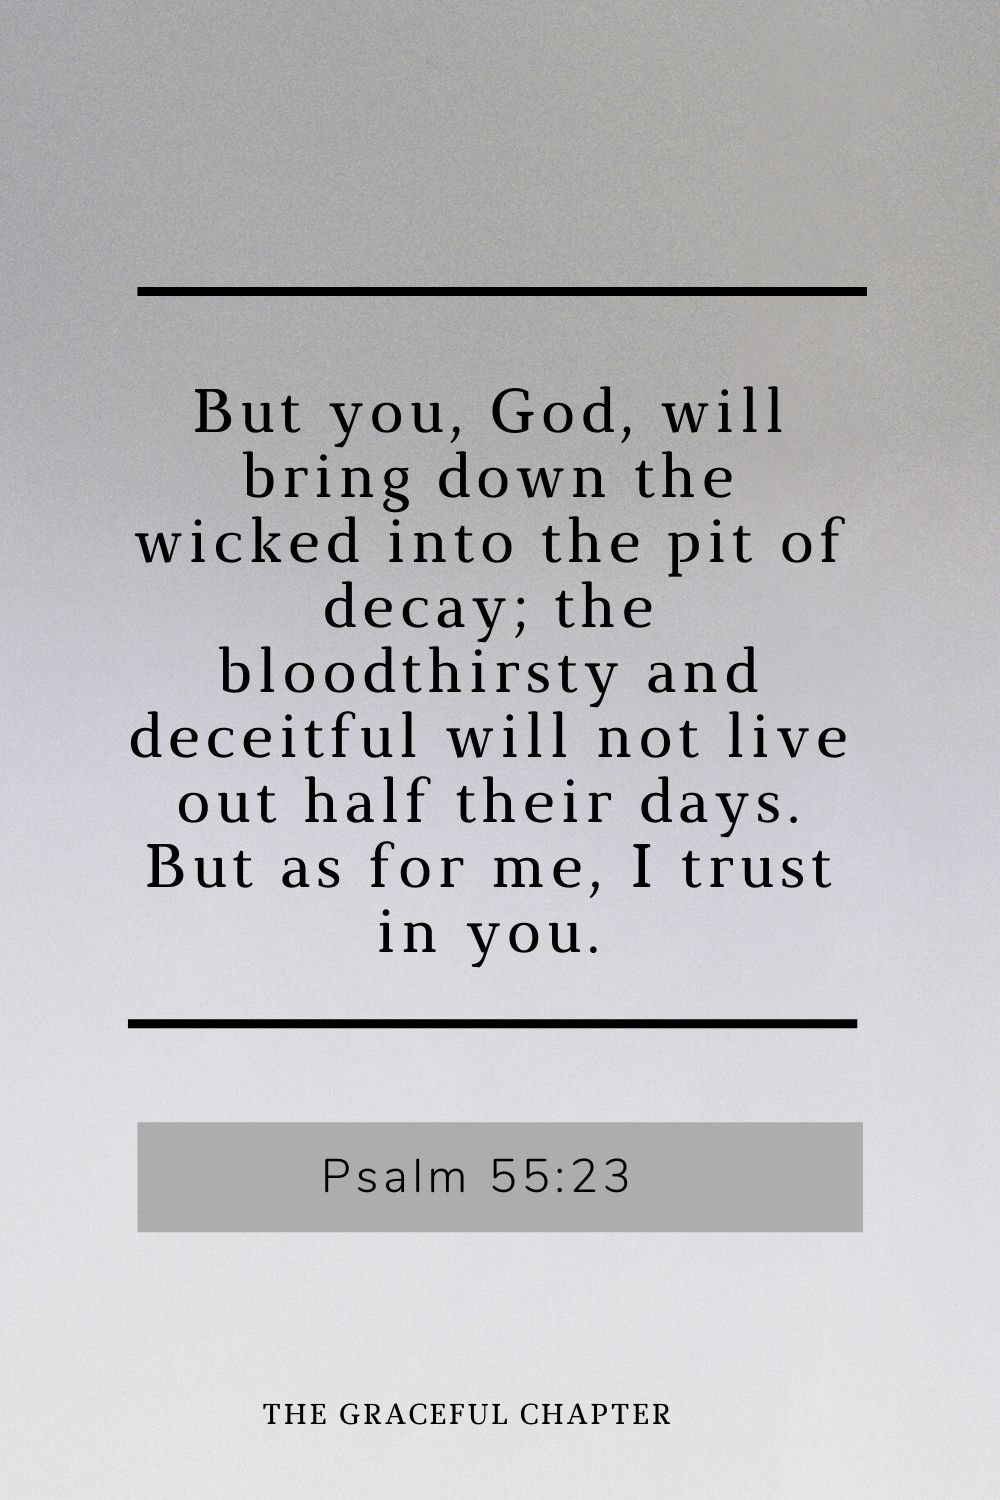 But you, God, will bring down the wicked into the pit of decay; the bloodthirsty and deceitful will not live out half their days. But as for me, I trust in you. Psalm 55:23